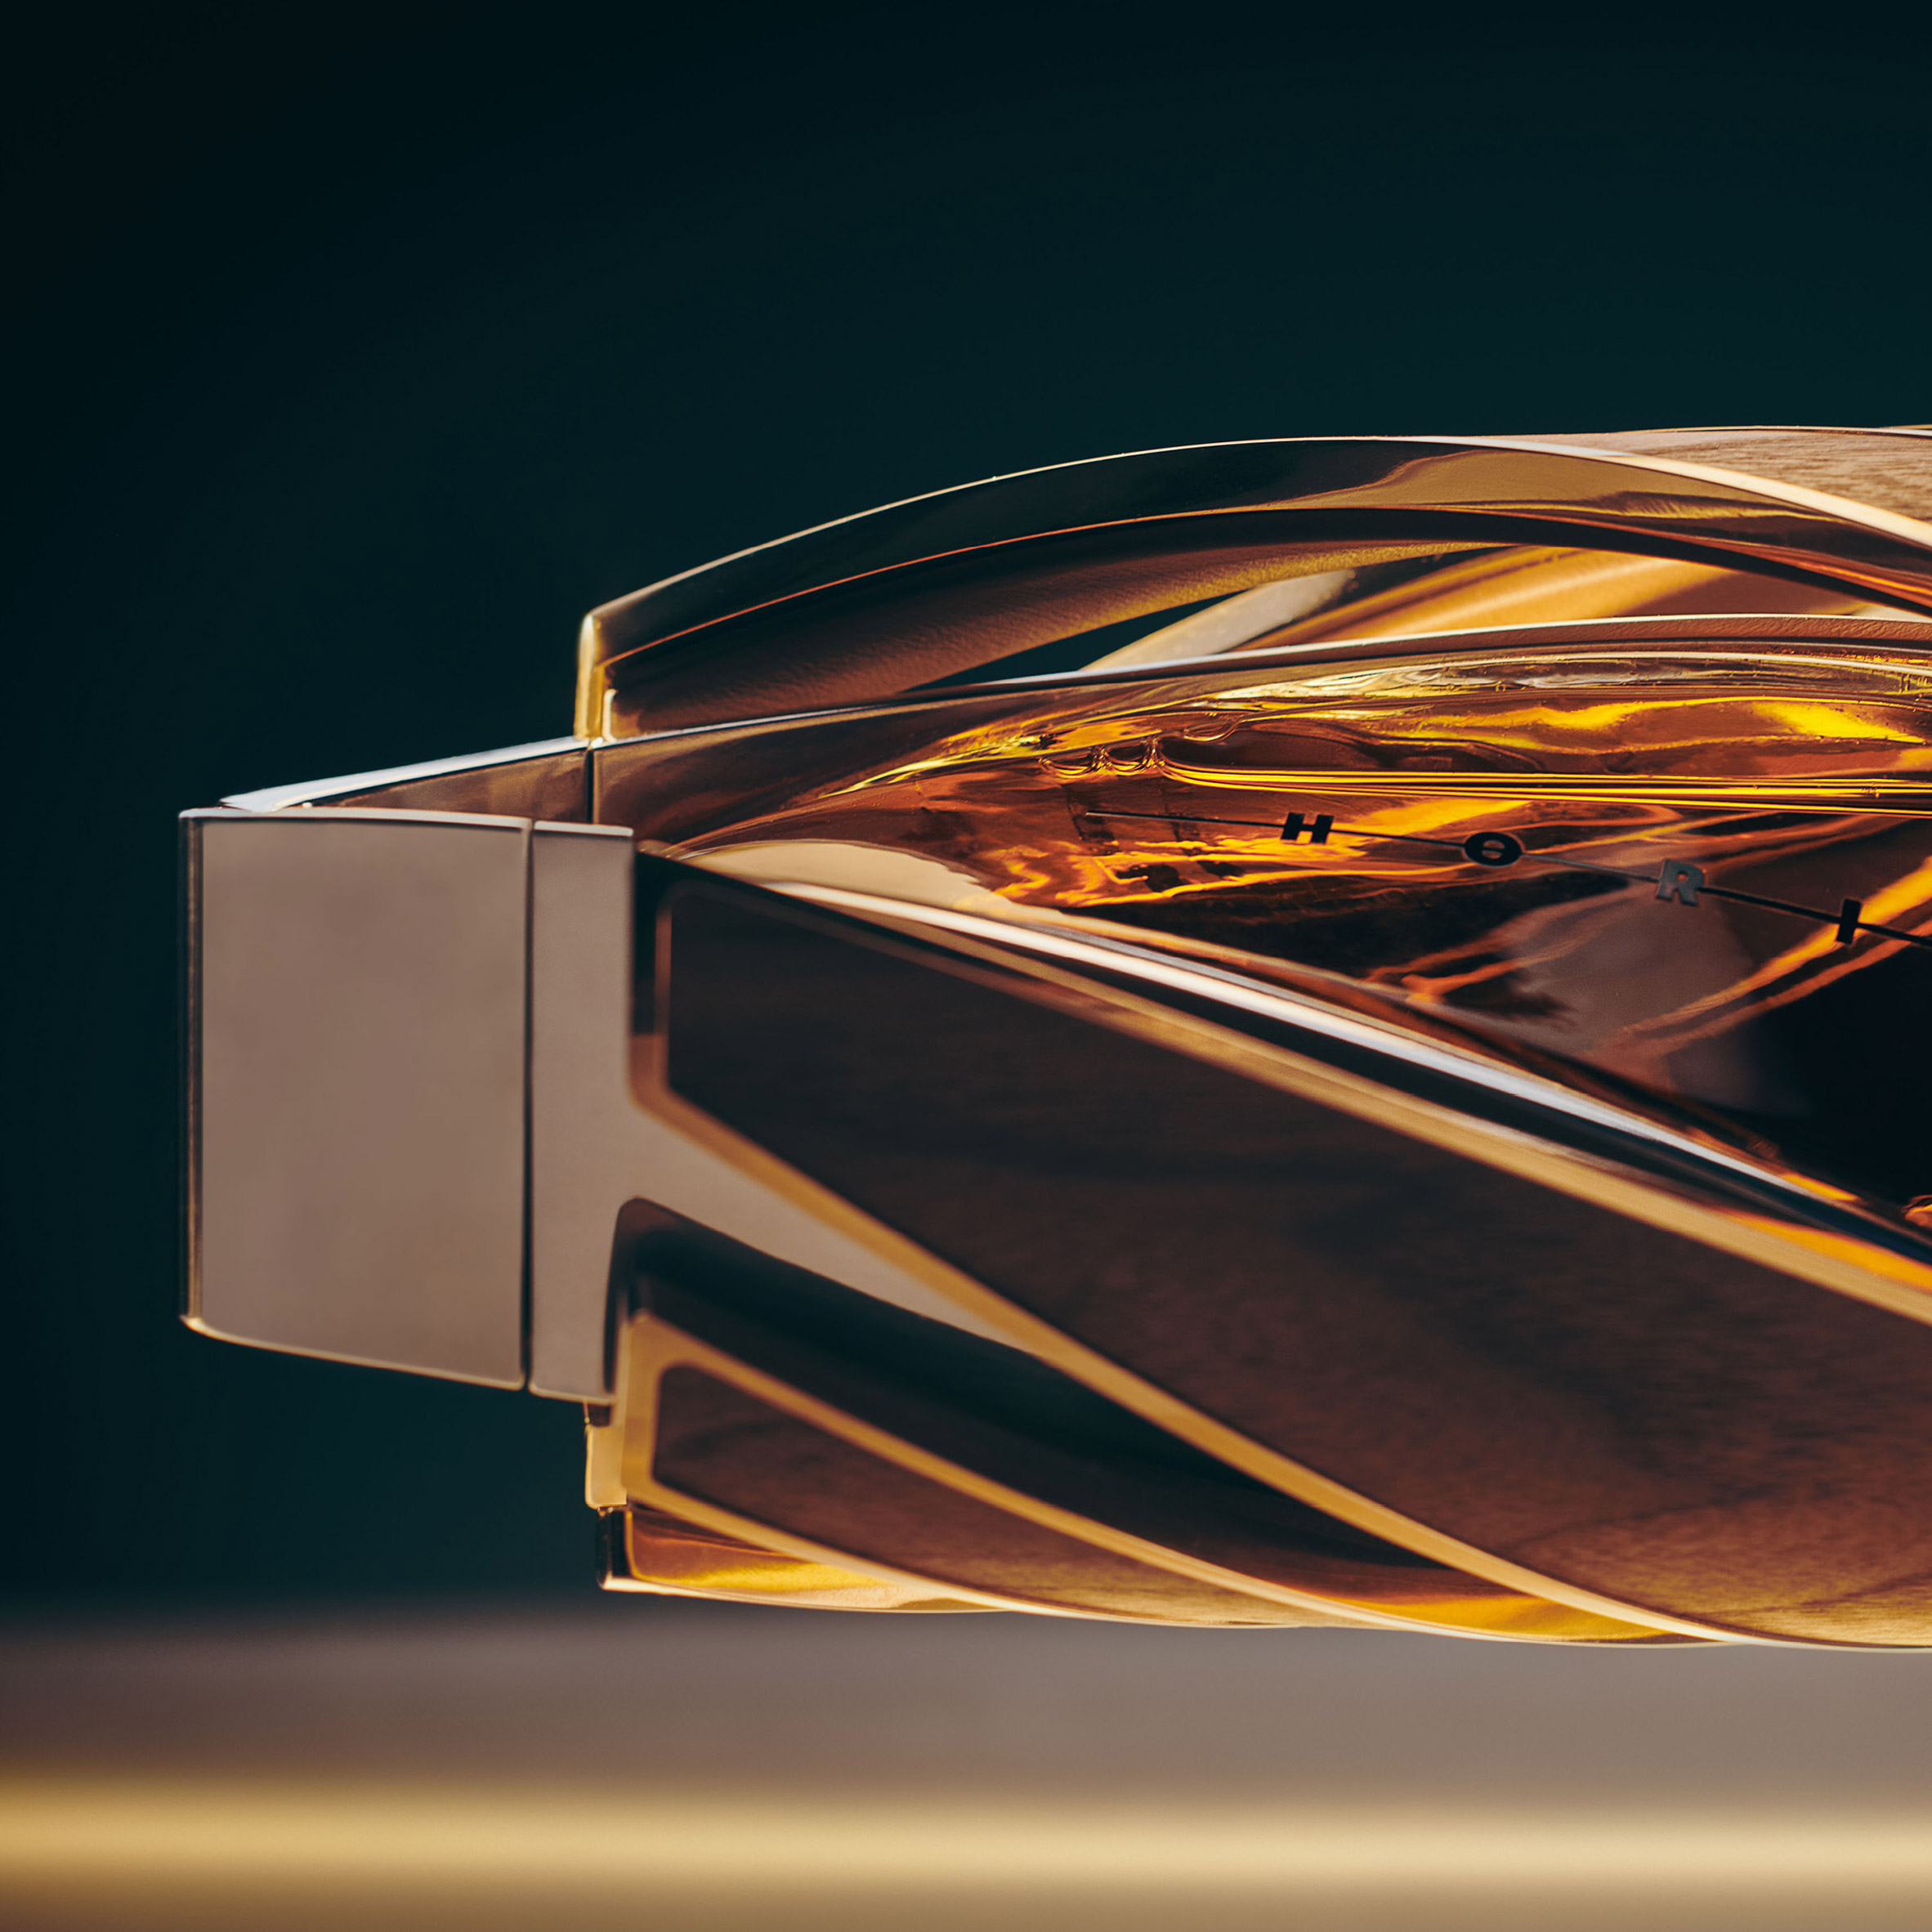 The Horizon, a sculptural whisky vessel designed by Bentley and The Macallan